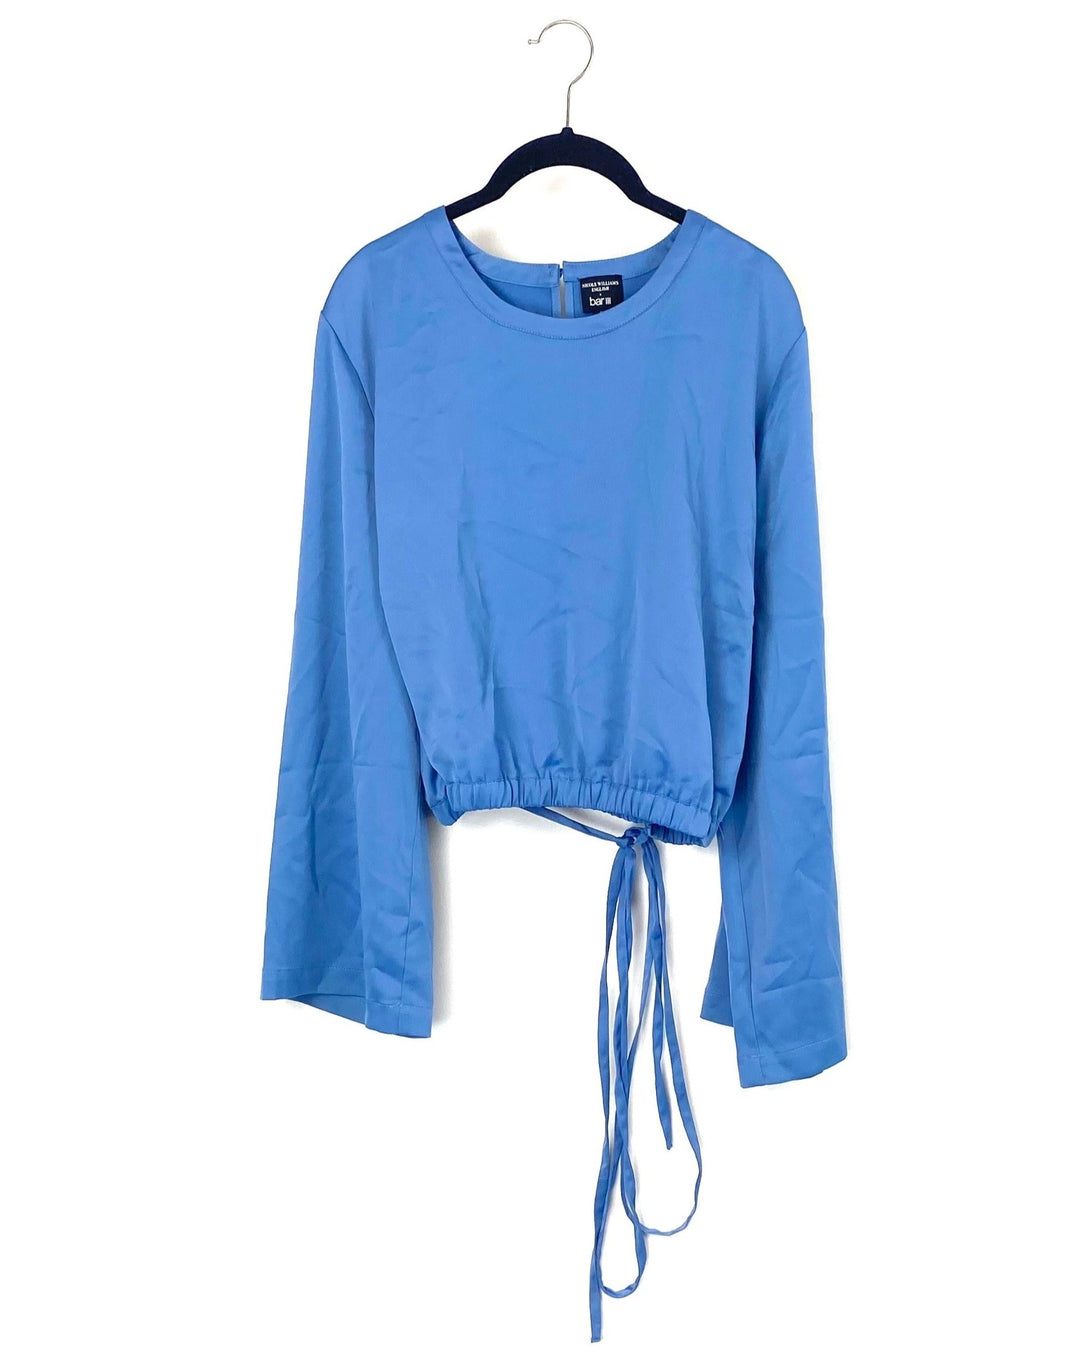 Blue Long Sleeve Top - Size 12, 14 and 26/28